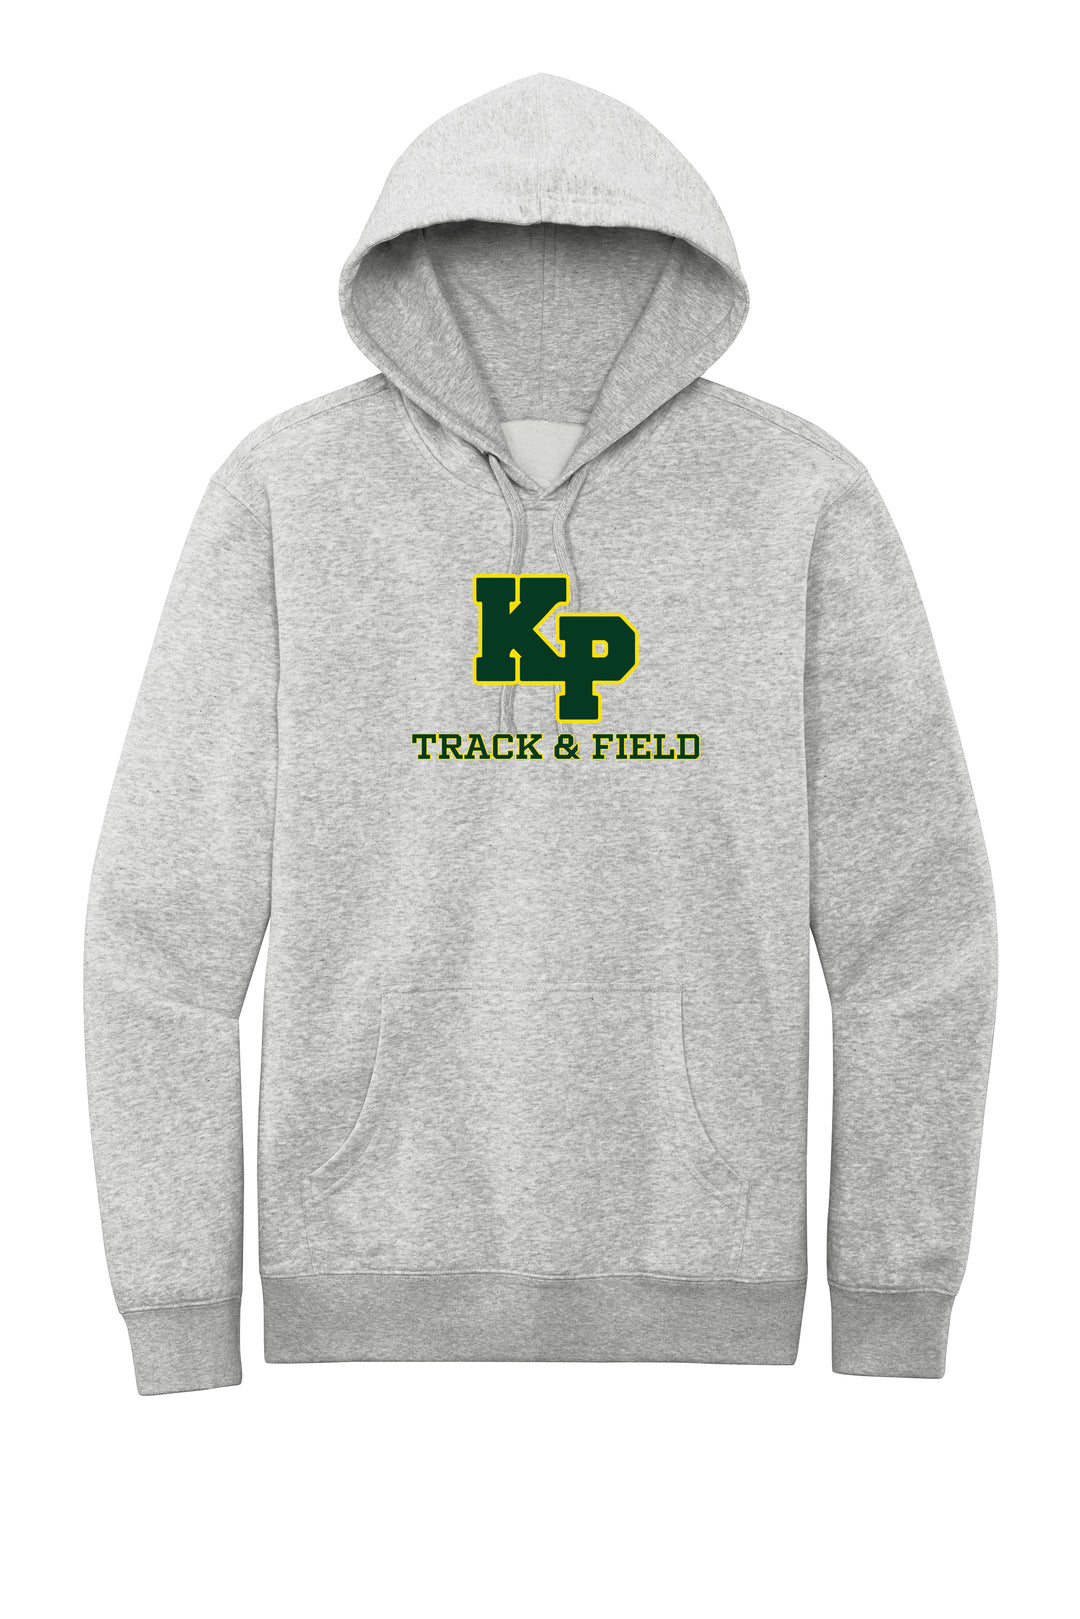 King Philip Track and Field Unisex V.I.T Fleece Hoodie (DT6100)